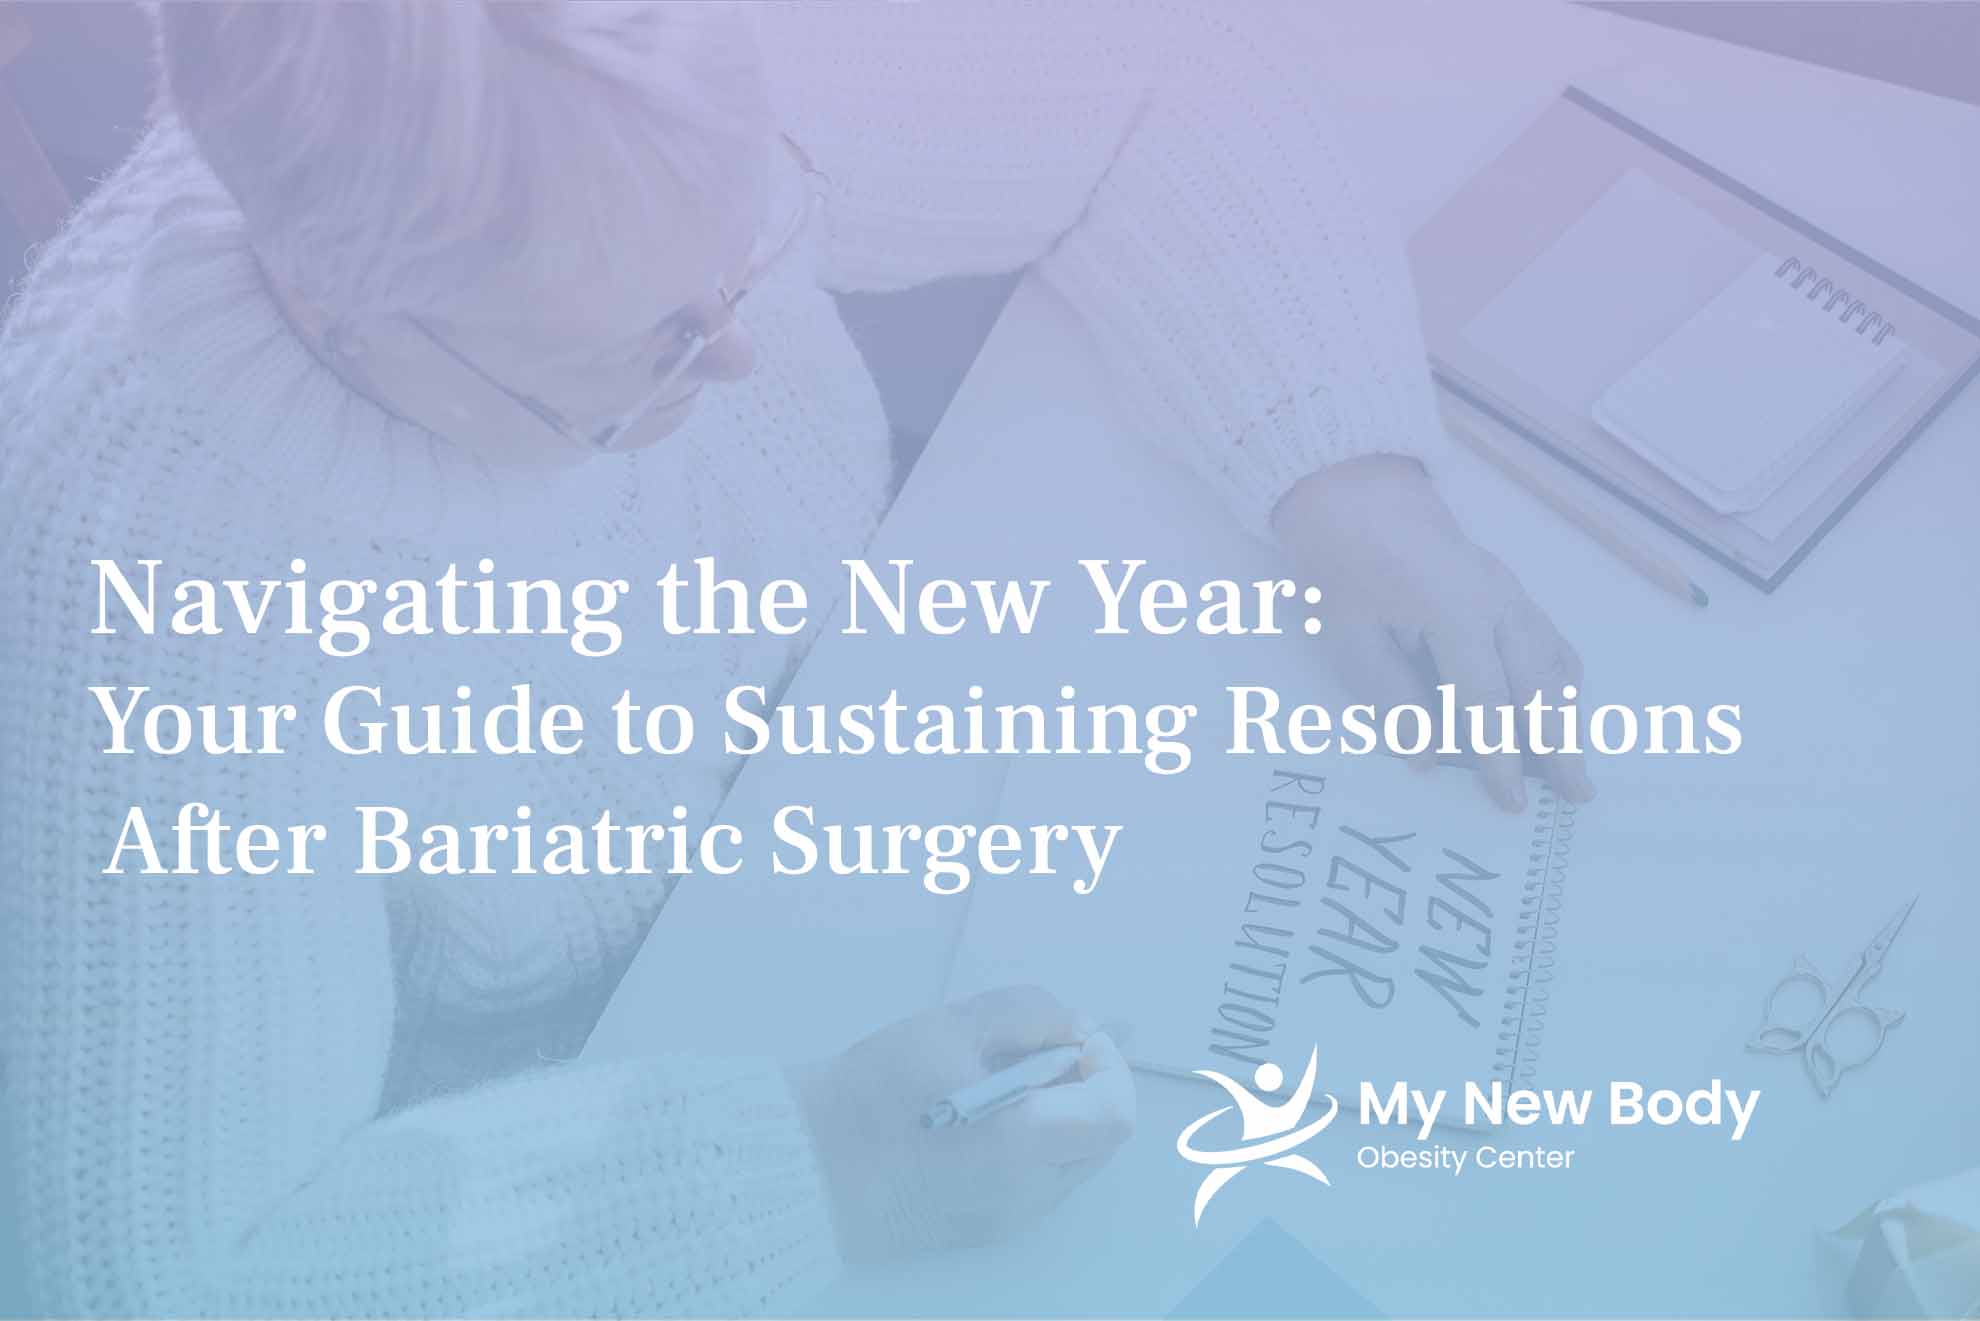 Resolutions After Bariatric Surgery